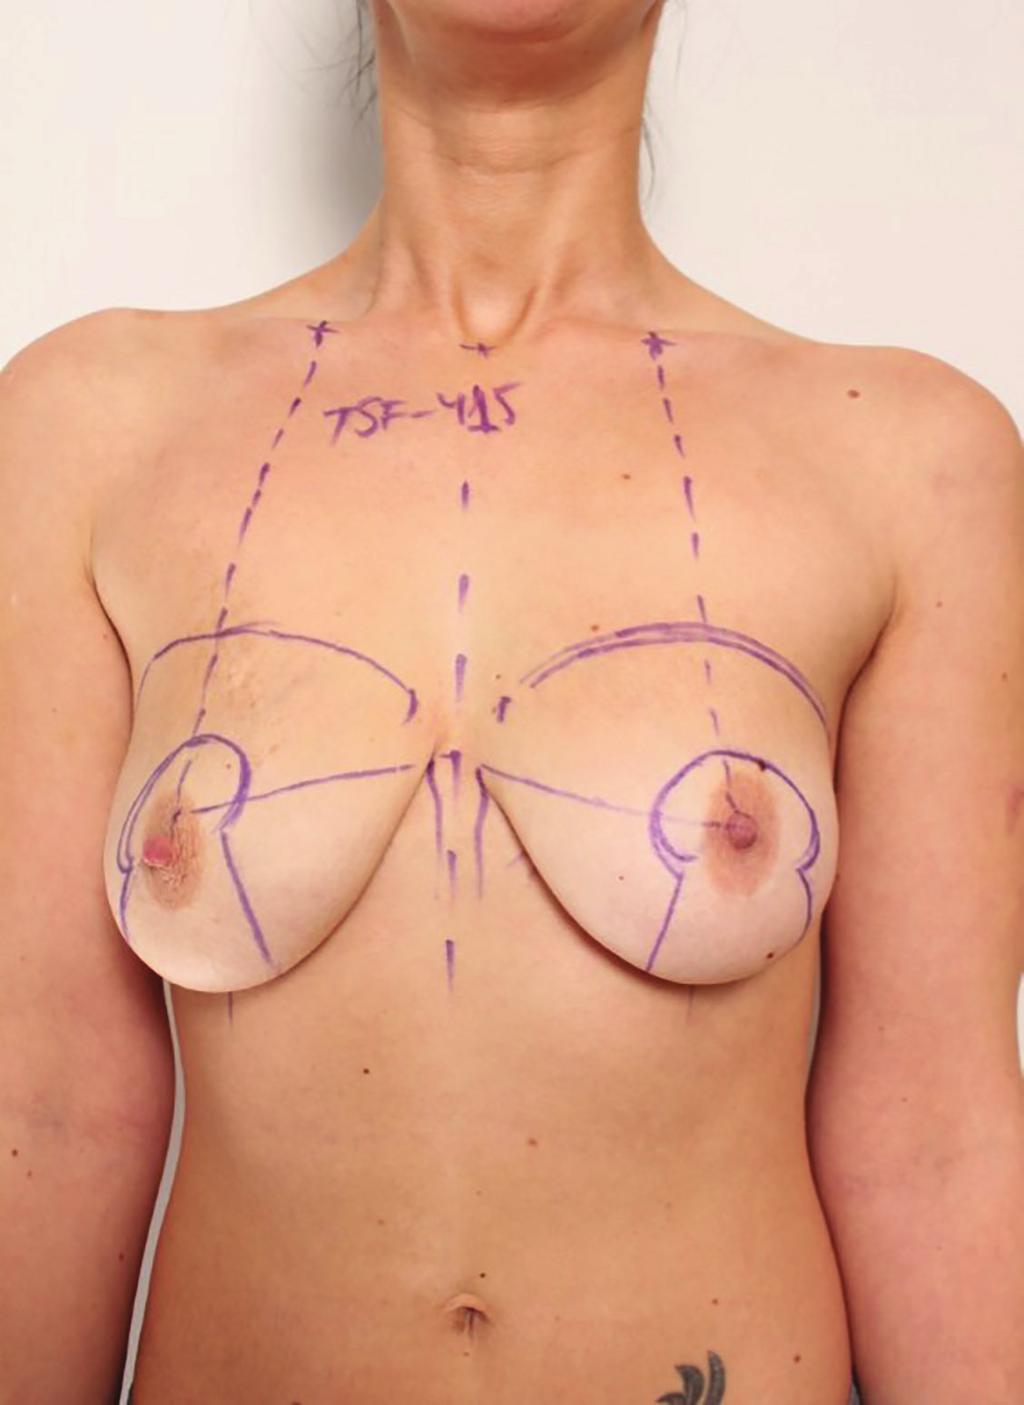 Vikšraitis et al. 3 Like any other operation, this procedure also has its general risk.